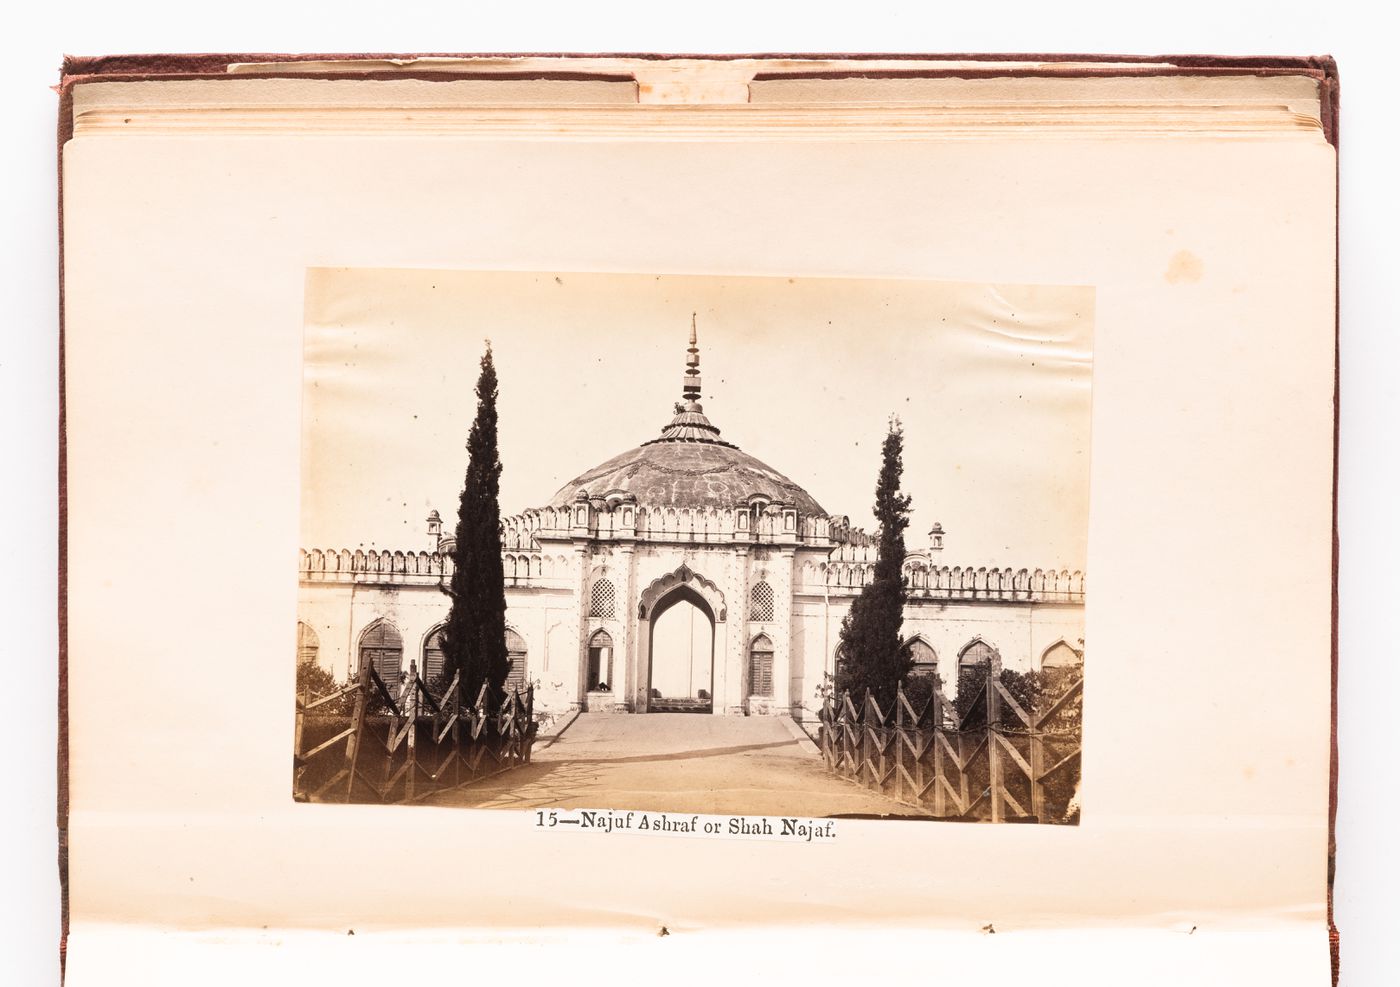 View of the portal of the Shah Najaf (also known as the Najuf Ashruf or the Mausoleum of King Ghazi-ud-Din Haidar), Lucknow, India